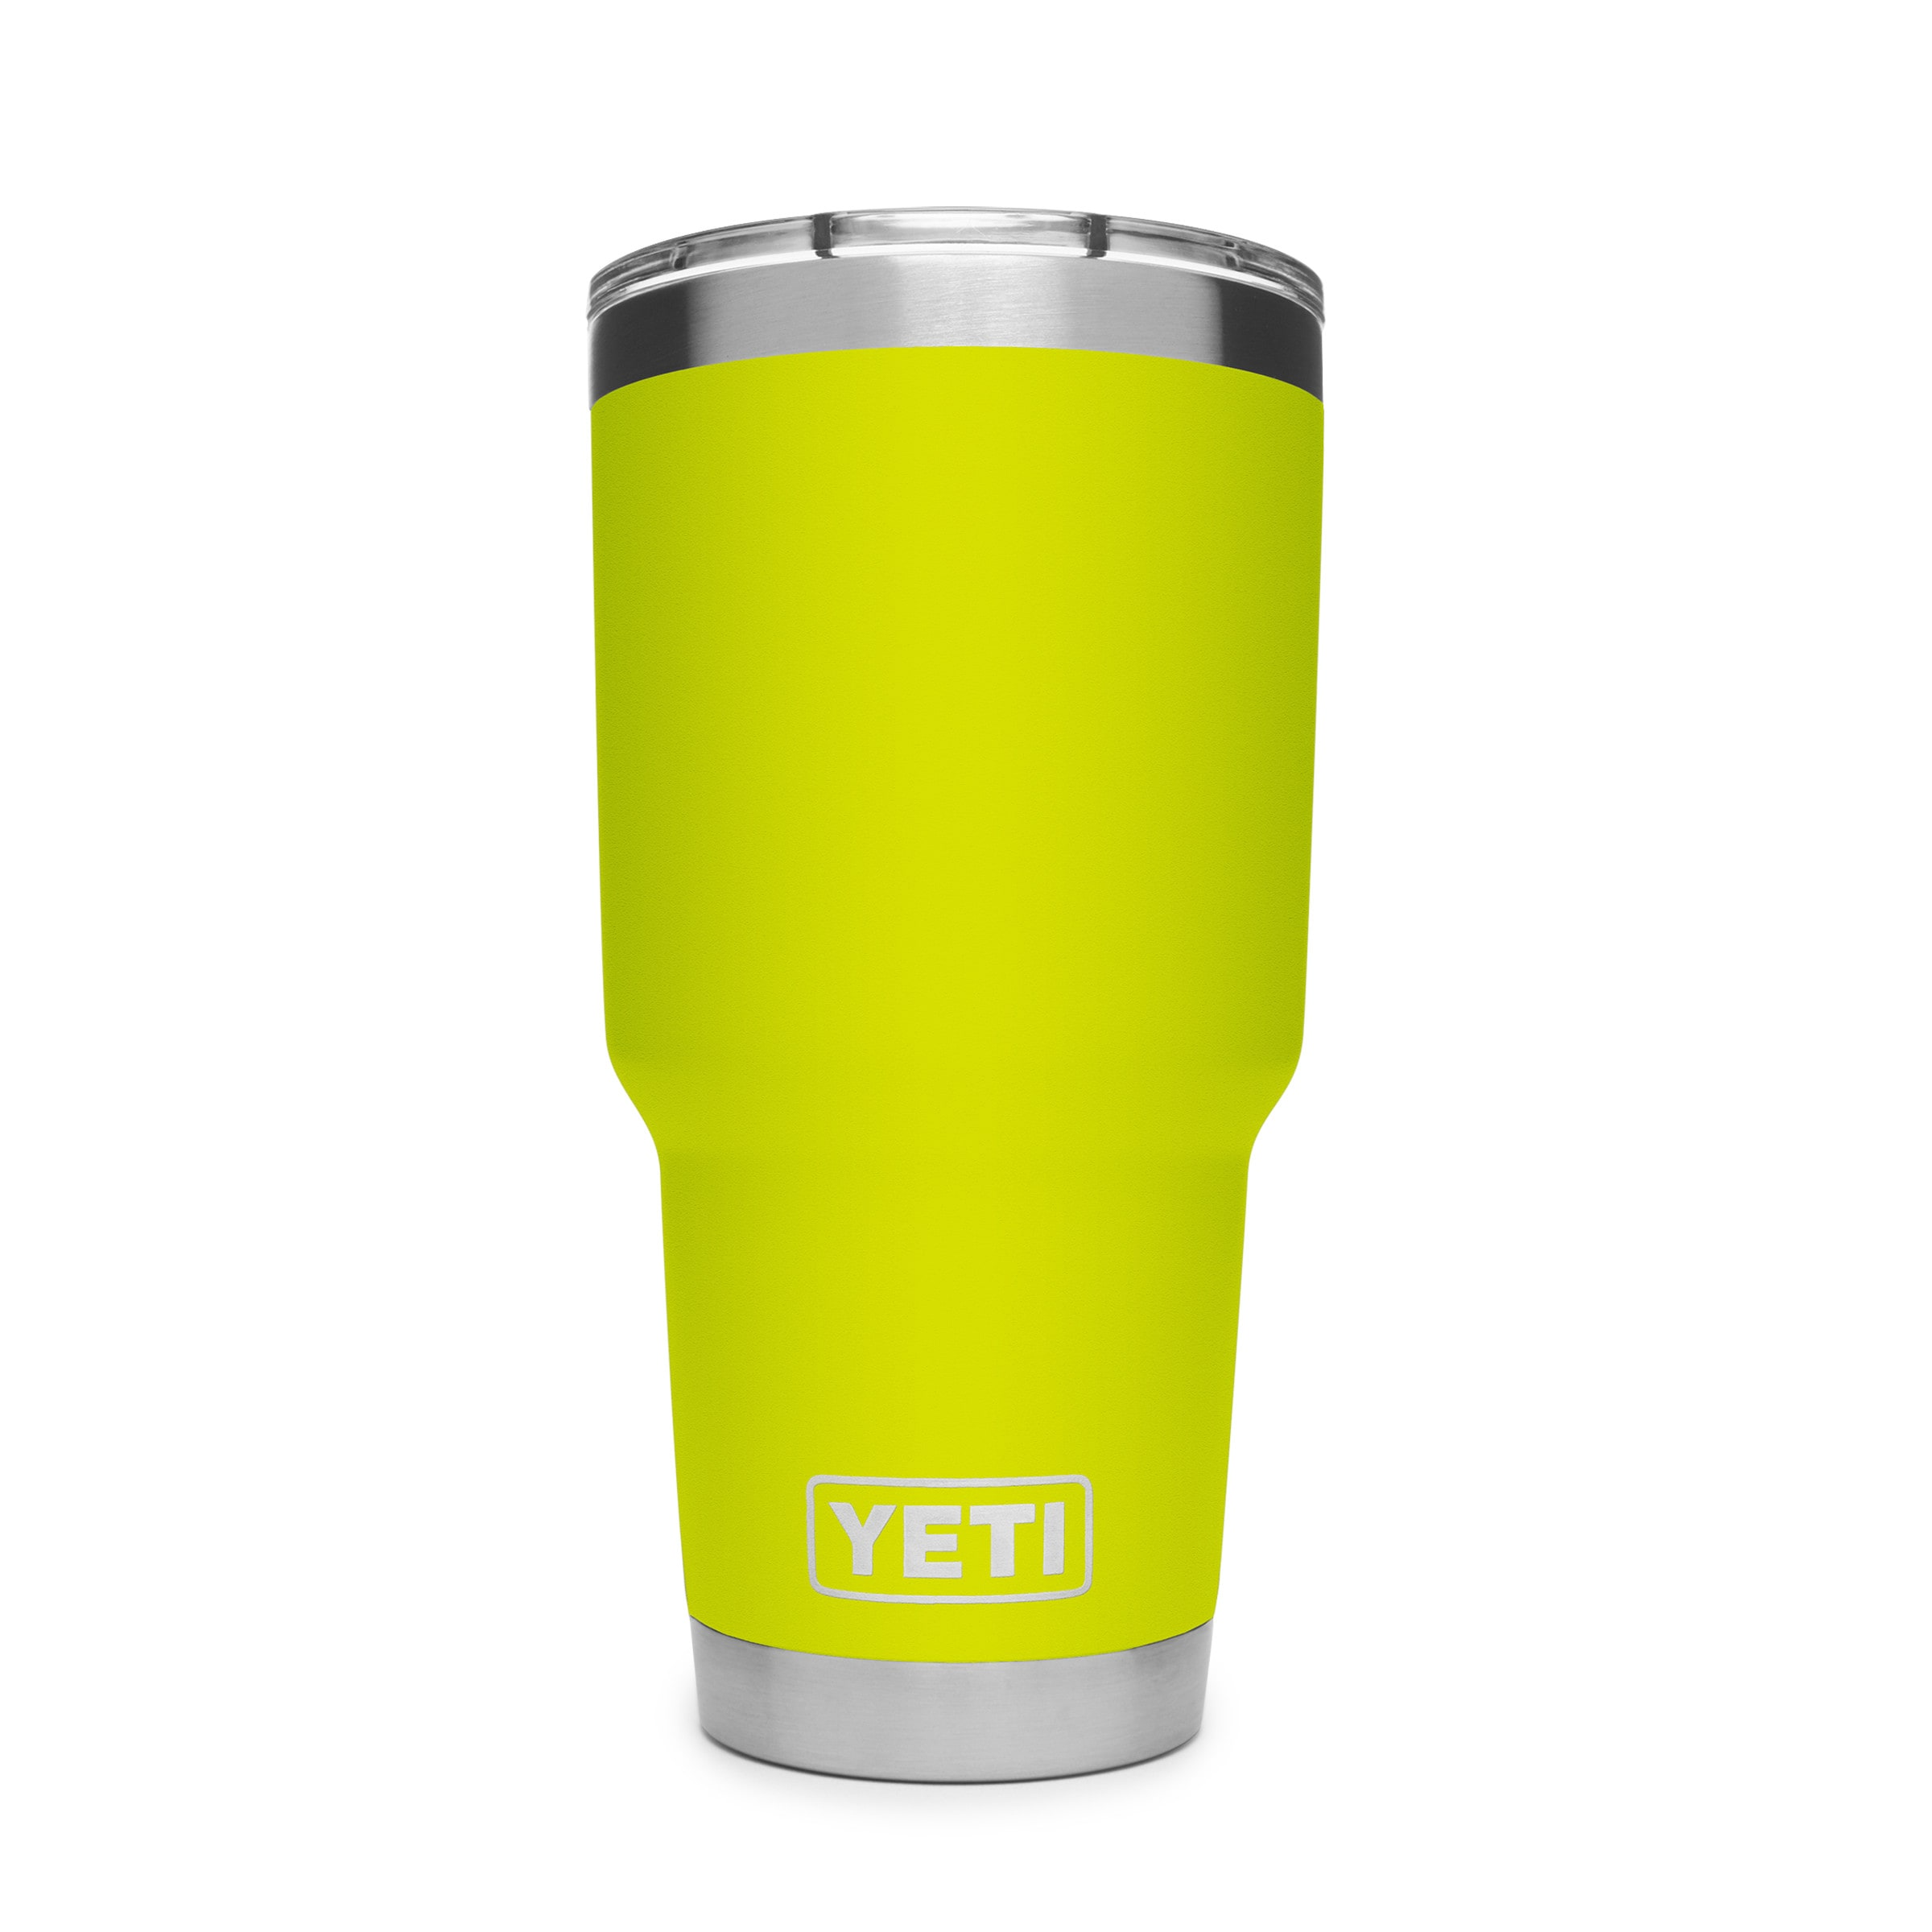 REAL YETI 24 Oz. Laser Engraved Charcoal Stainless Steel Yeti